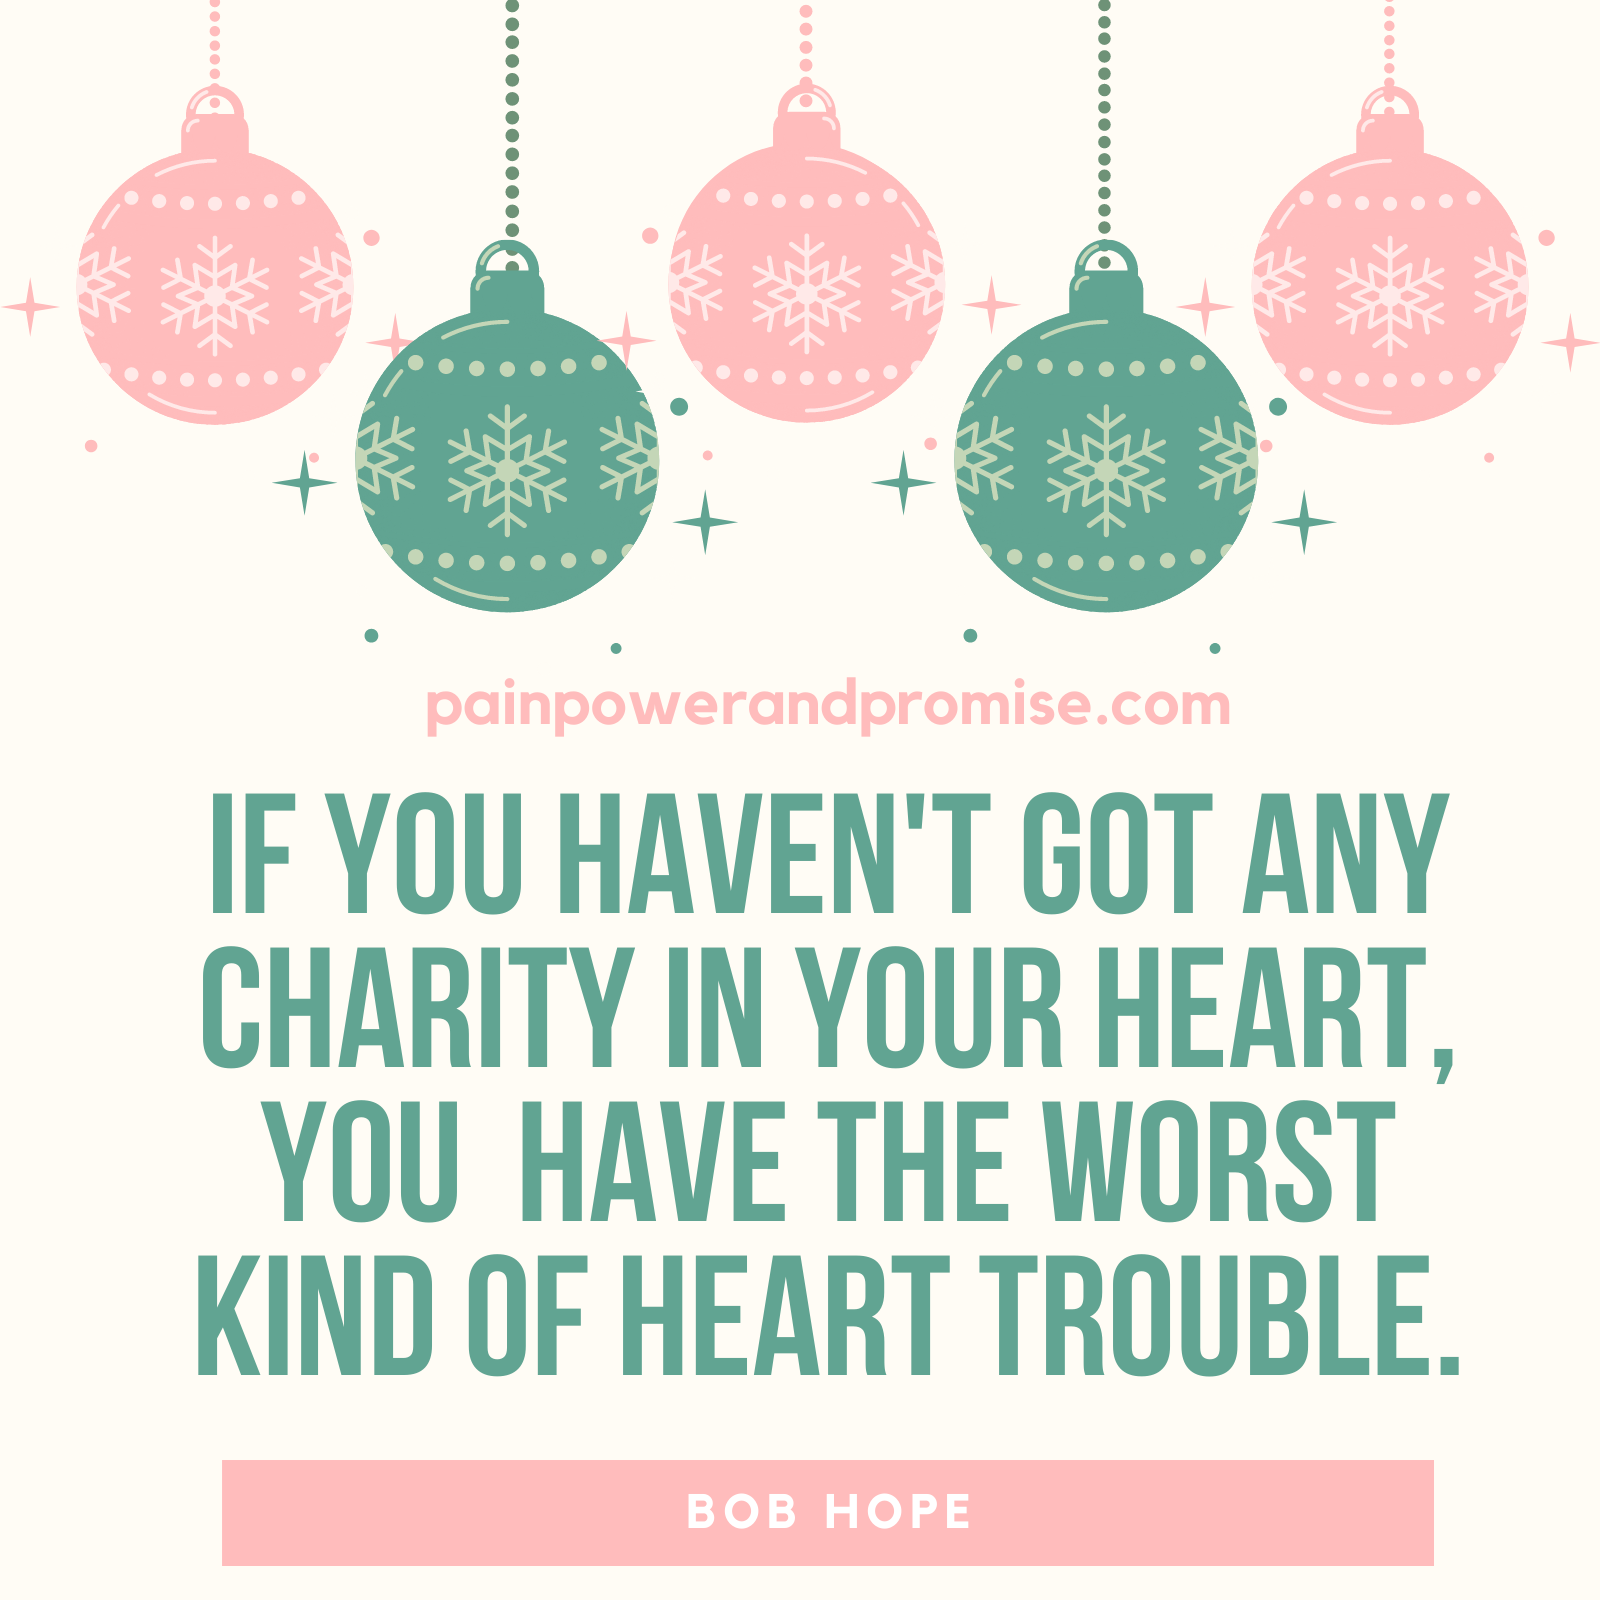 Inspirational Quote: If you haven't got any charity in your heart, you have the worst kind of heart trouble.